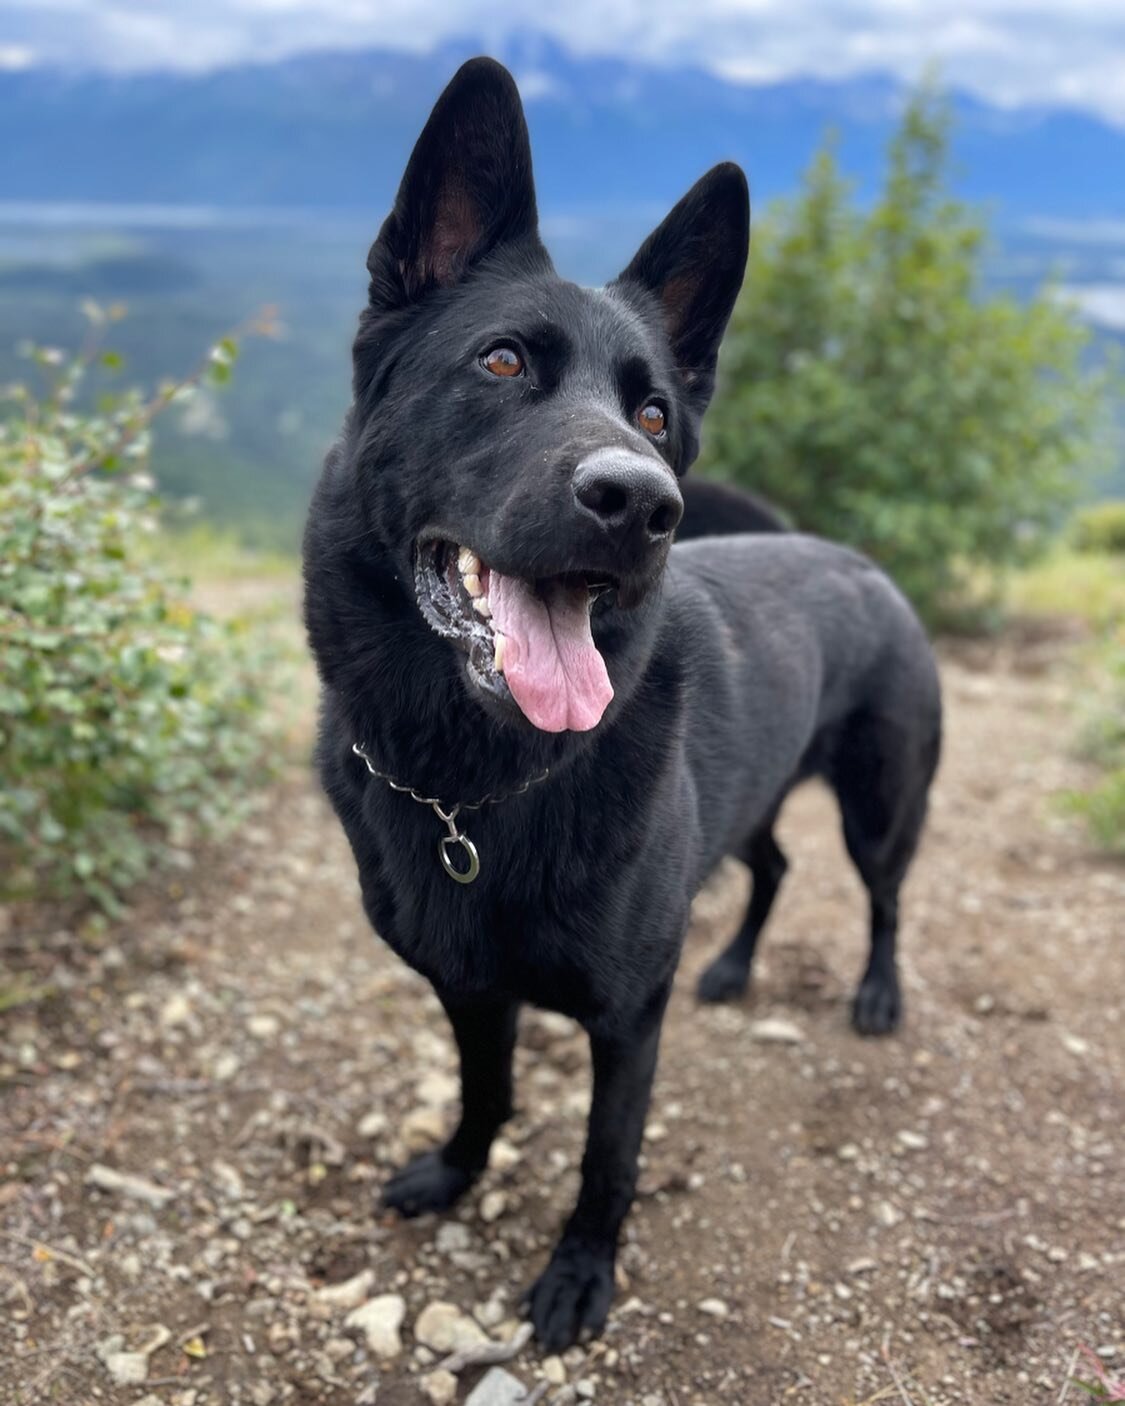 Hello friends! Apologies for the lack of social media presence these days. We have been busy slanging bowls and soaking up this great Alaskan summer. Please enjoy this photo of our dog, Brahma, while we share some exciting news with you! 🐾 Starting 